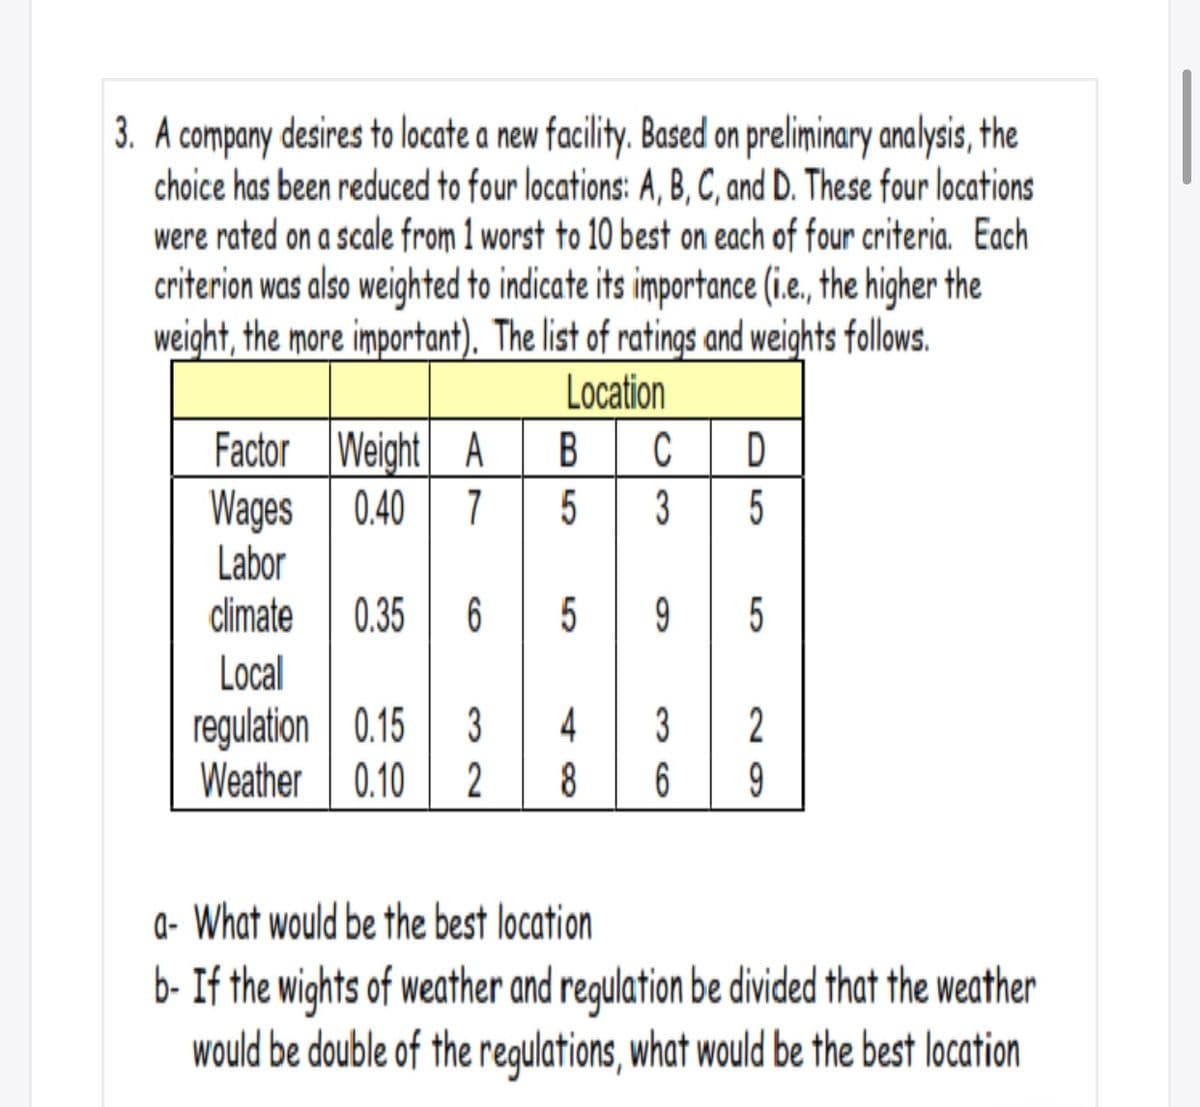 3. A company desires to locate a new facility. Based on preliminary analysis, the
choice has been reduced to four locations: A, B, C, and D. These four locations
were rated on a scale from 1 worst to 10 best on each of four criteria. Each
criterion was also weighted to indicate its importance (i.e, the higher the
weight, the more important). The list of ratings and weights follows.
Location
Factor Weight A
Wages 0.40
Labor
climate
C
7
3
5
0.35
6
9.
Local
regulation 0.15
4
3
2
Weather 0.10
2
a- What would be the best location
b- If the wights of weather and regulation be divided that the weather
would be double of the requlations, what would be the best location
2 69
5
